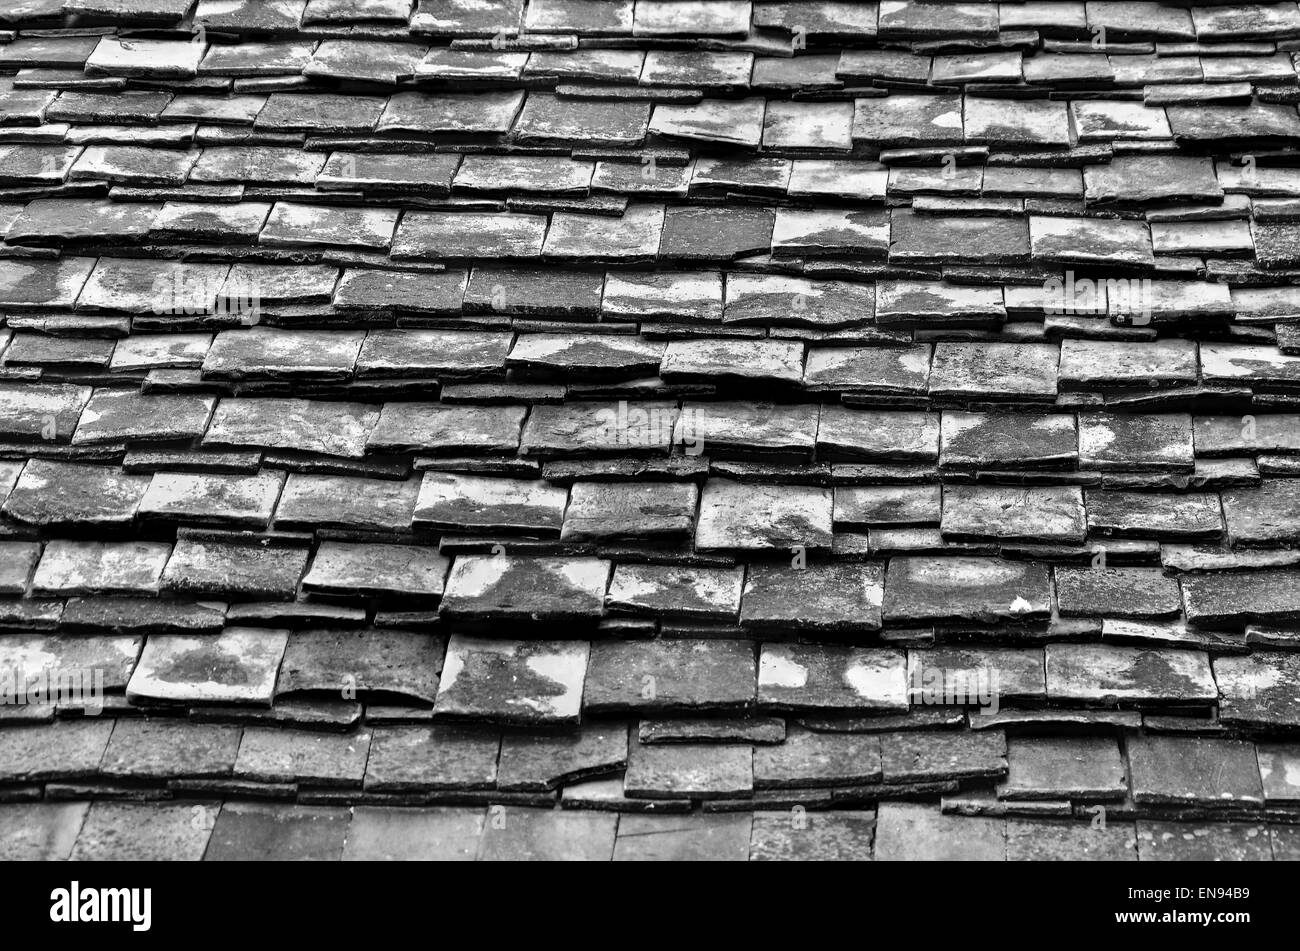 Old roof tiles made of terracotta Stock Photo